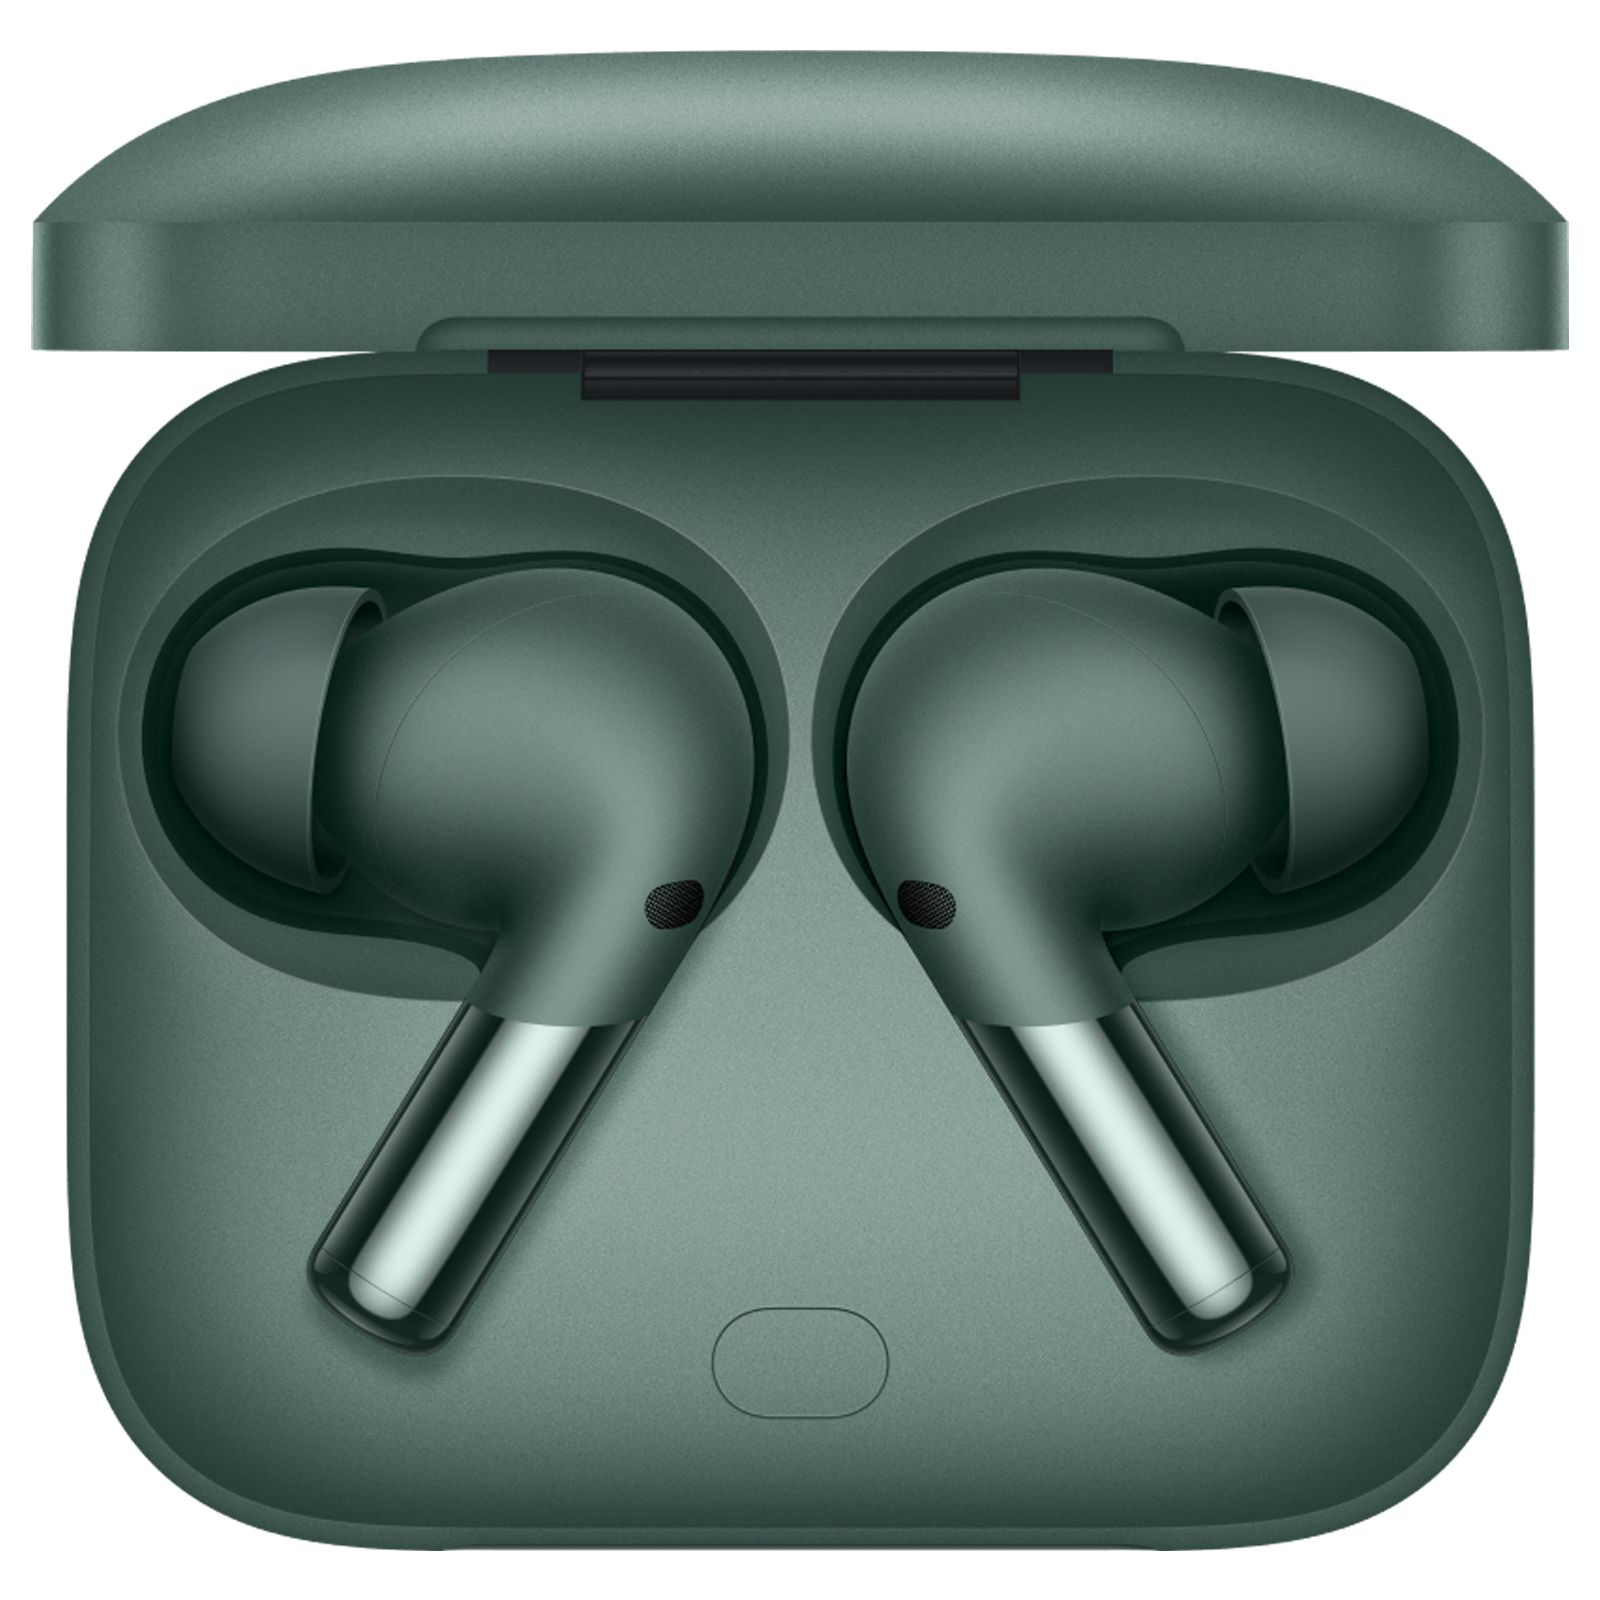 Buy OnePlus Buds Pro 2 TWS Earbuds with Adaptive Noise